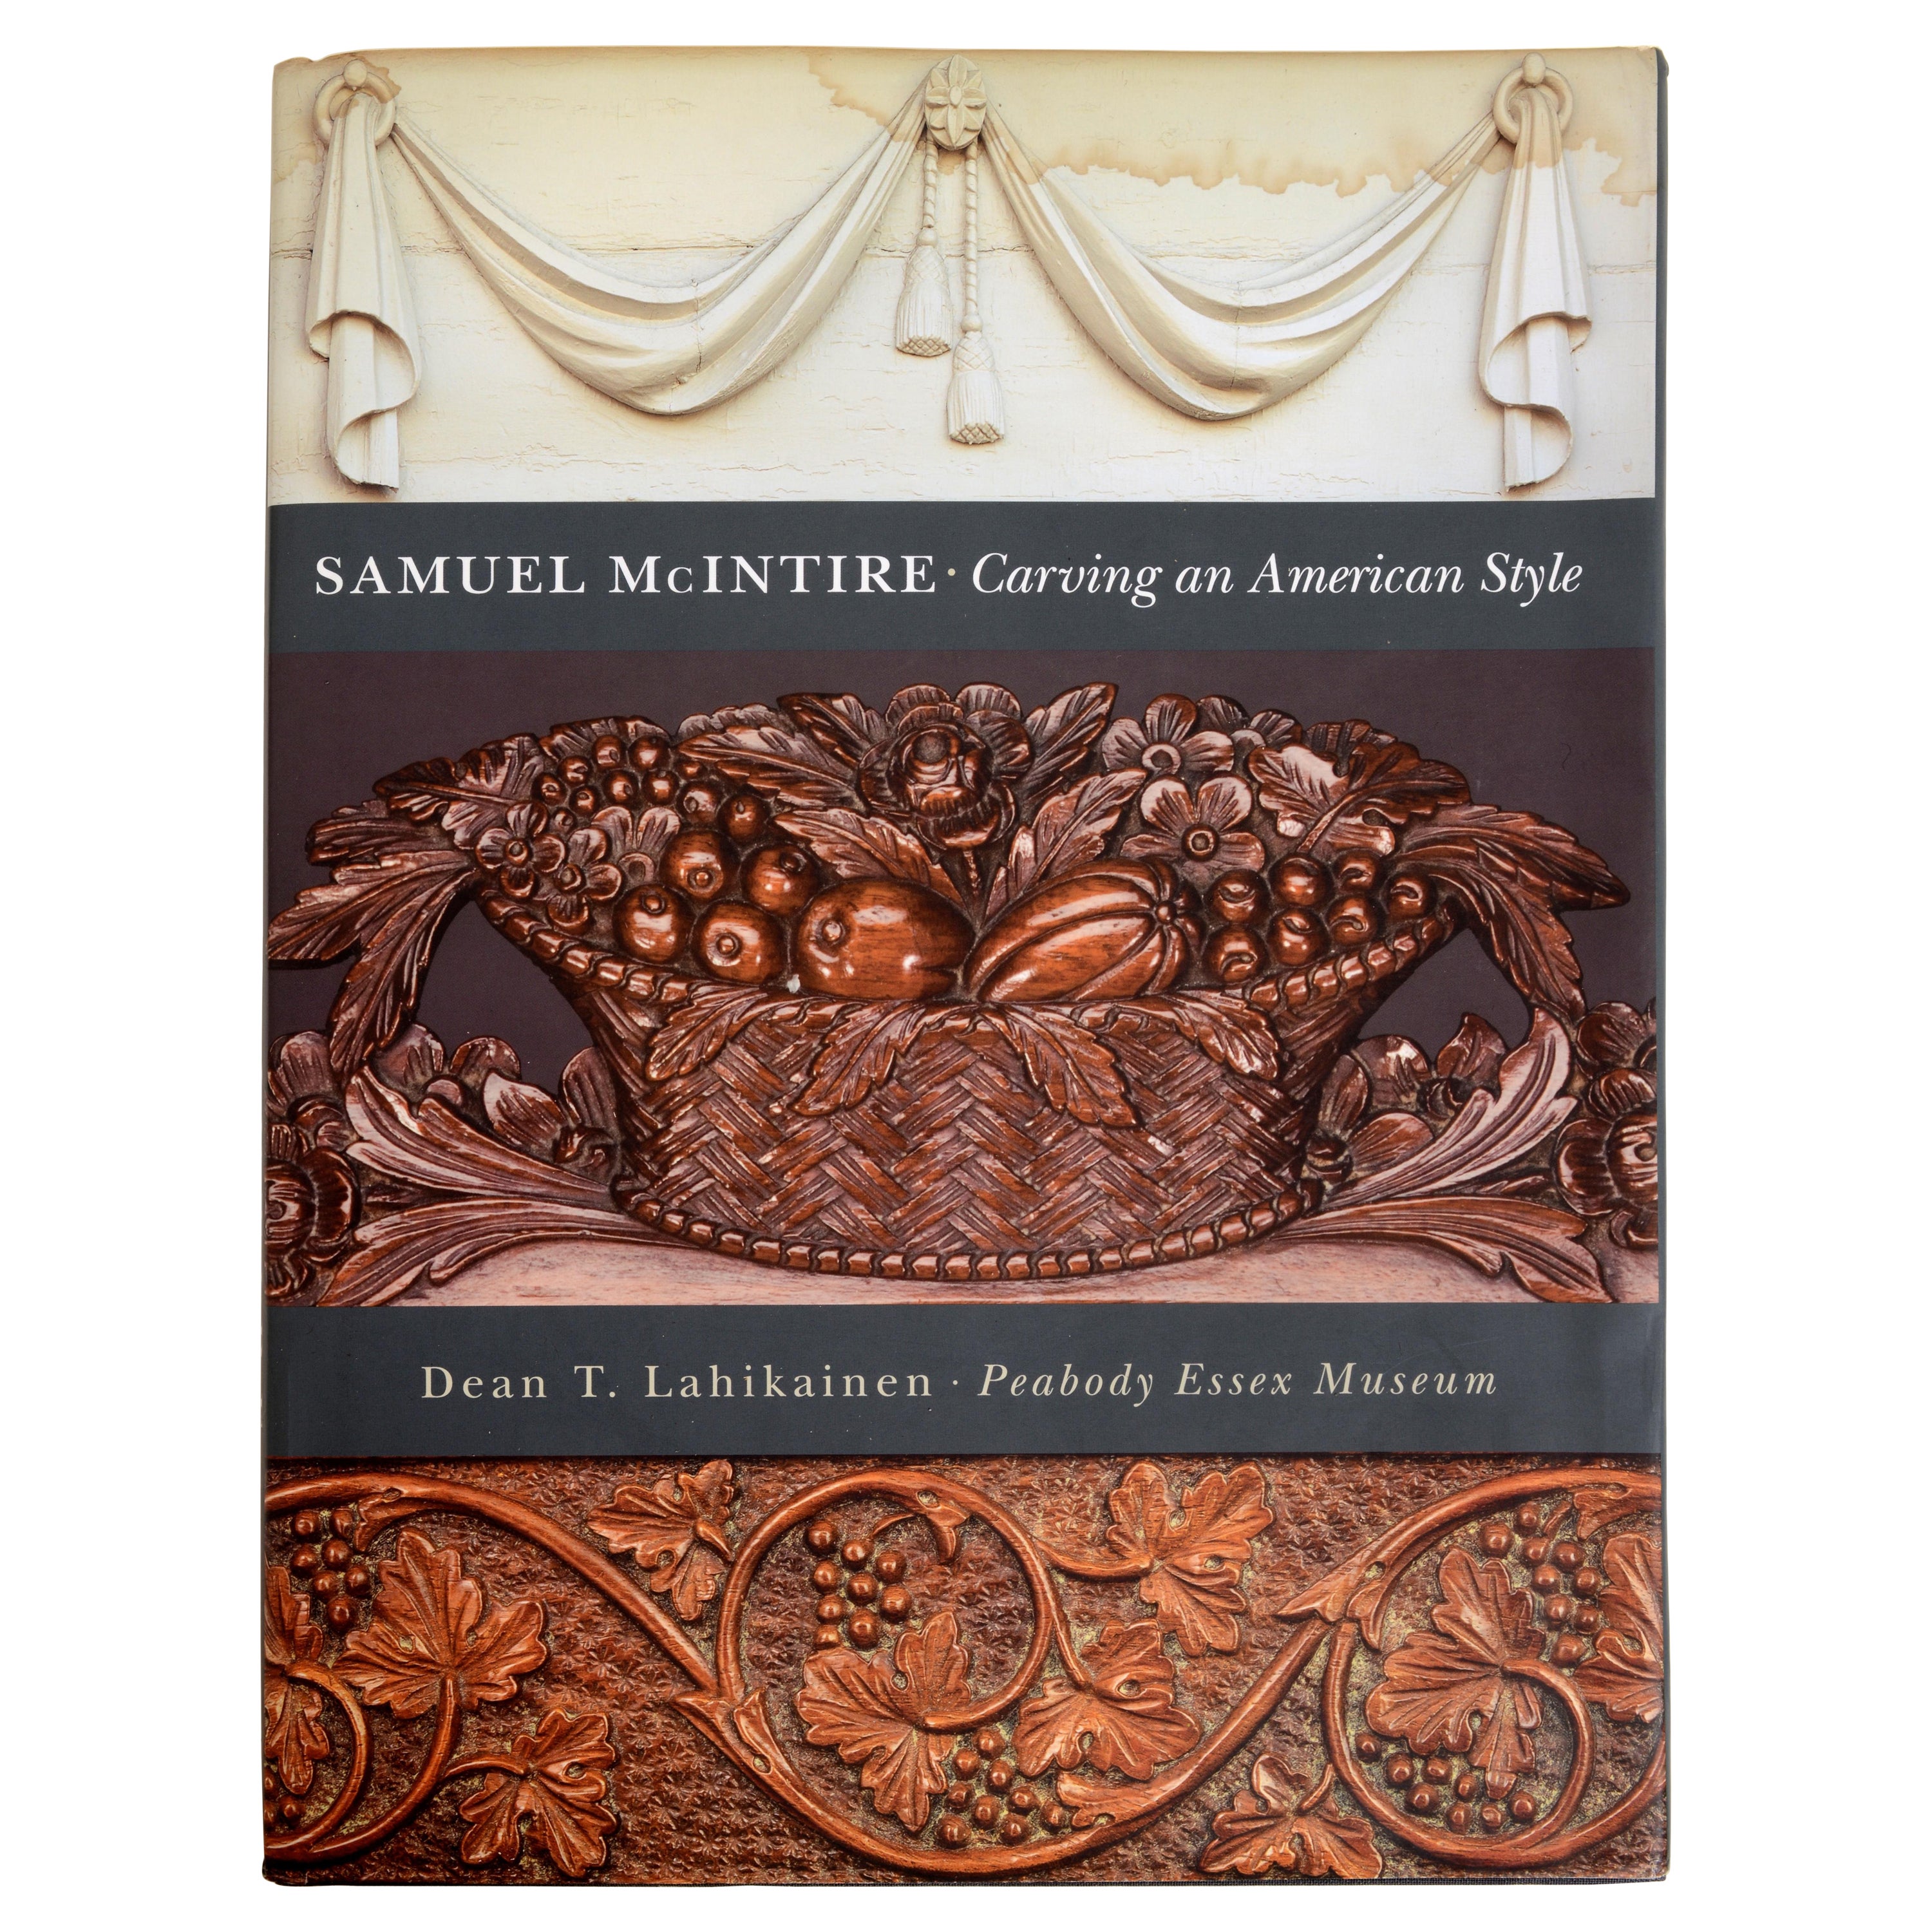 Samuel McIntire: Carving an American Style by Dean T. Lahikainen, 1st Ed For Sale